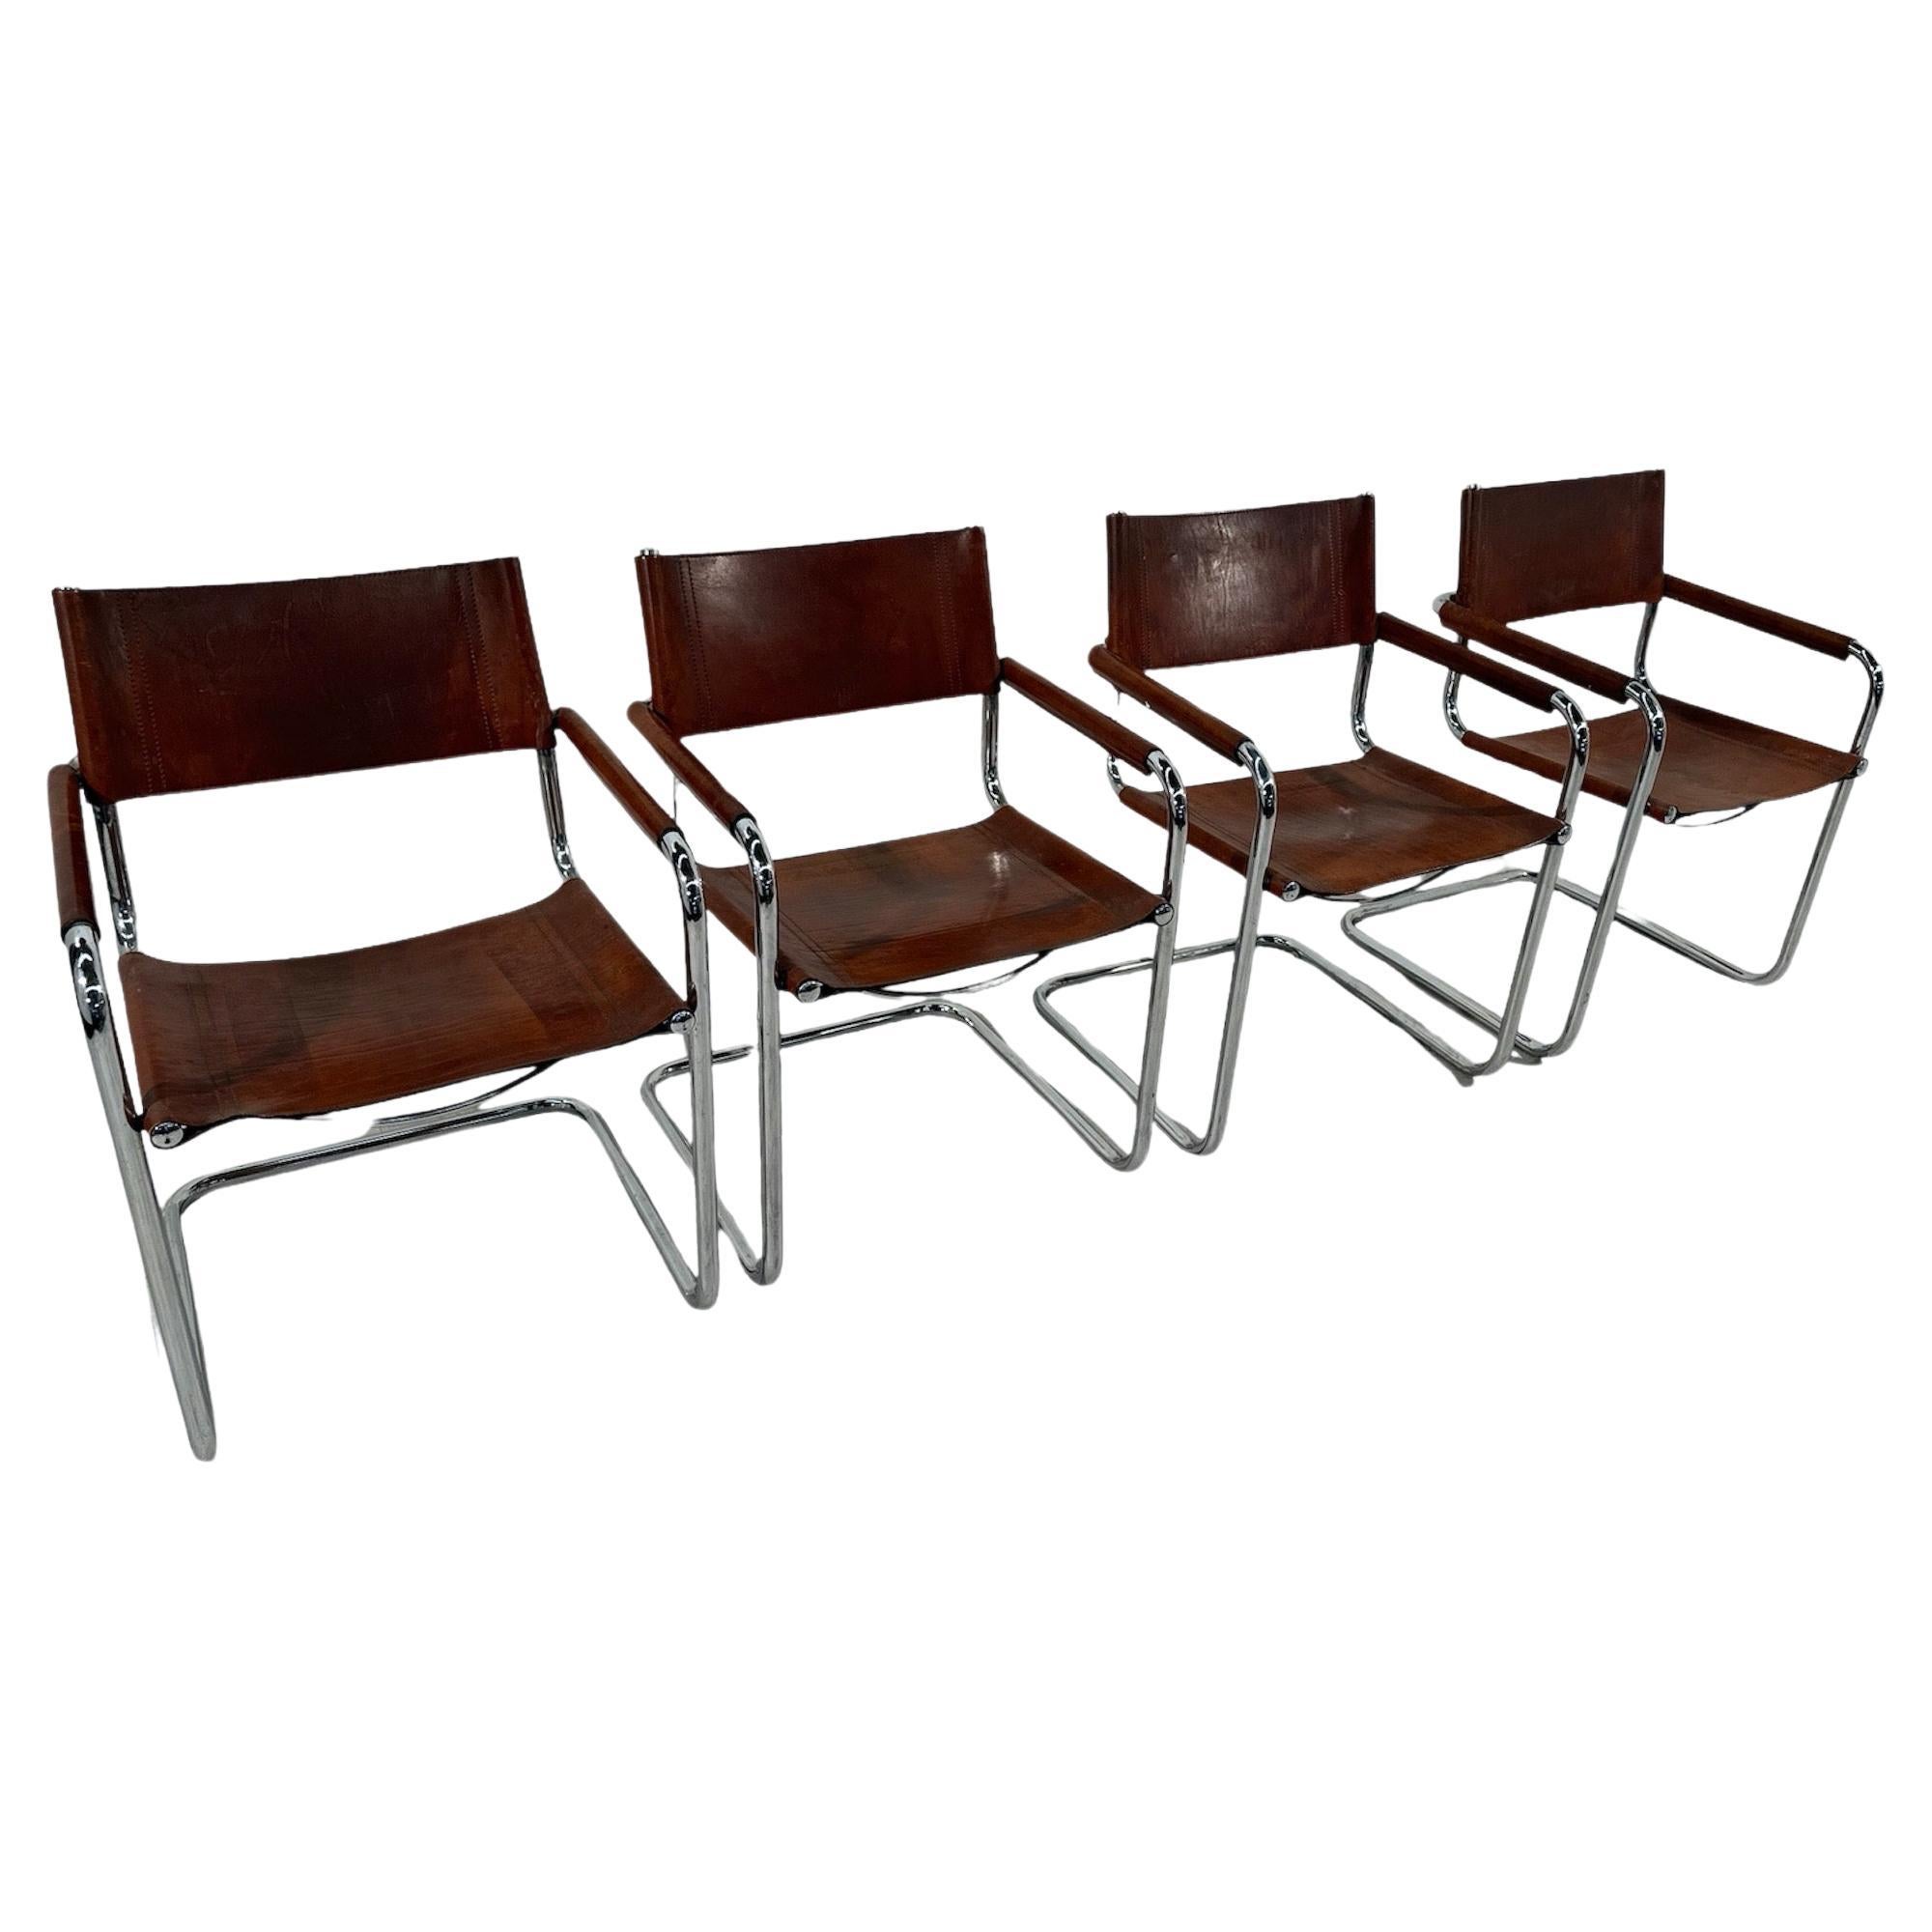 Vintage S34 Armchairs by Mart Stam & Marcel Breuer for Thonet, 1950s